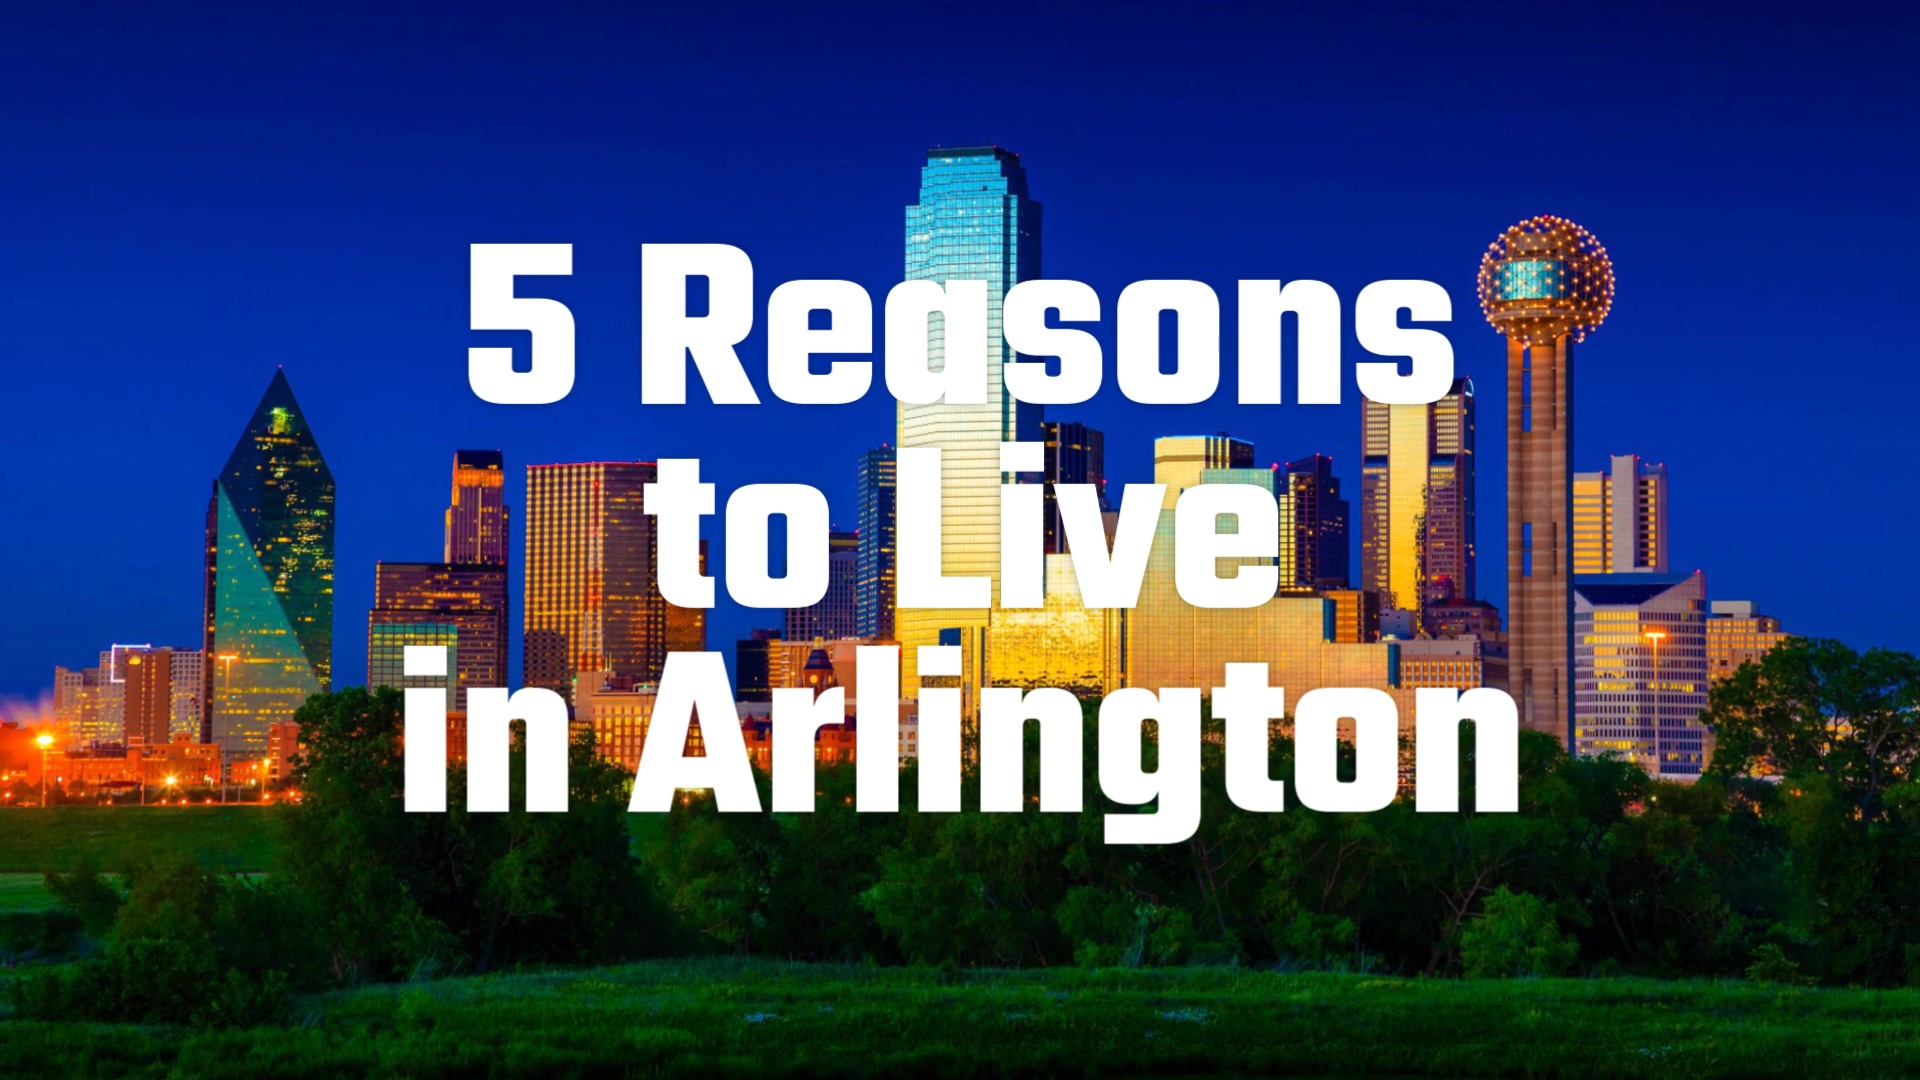 REVISED_5_Reasons_to_Live_in_Arlington_1080p-FINAL